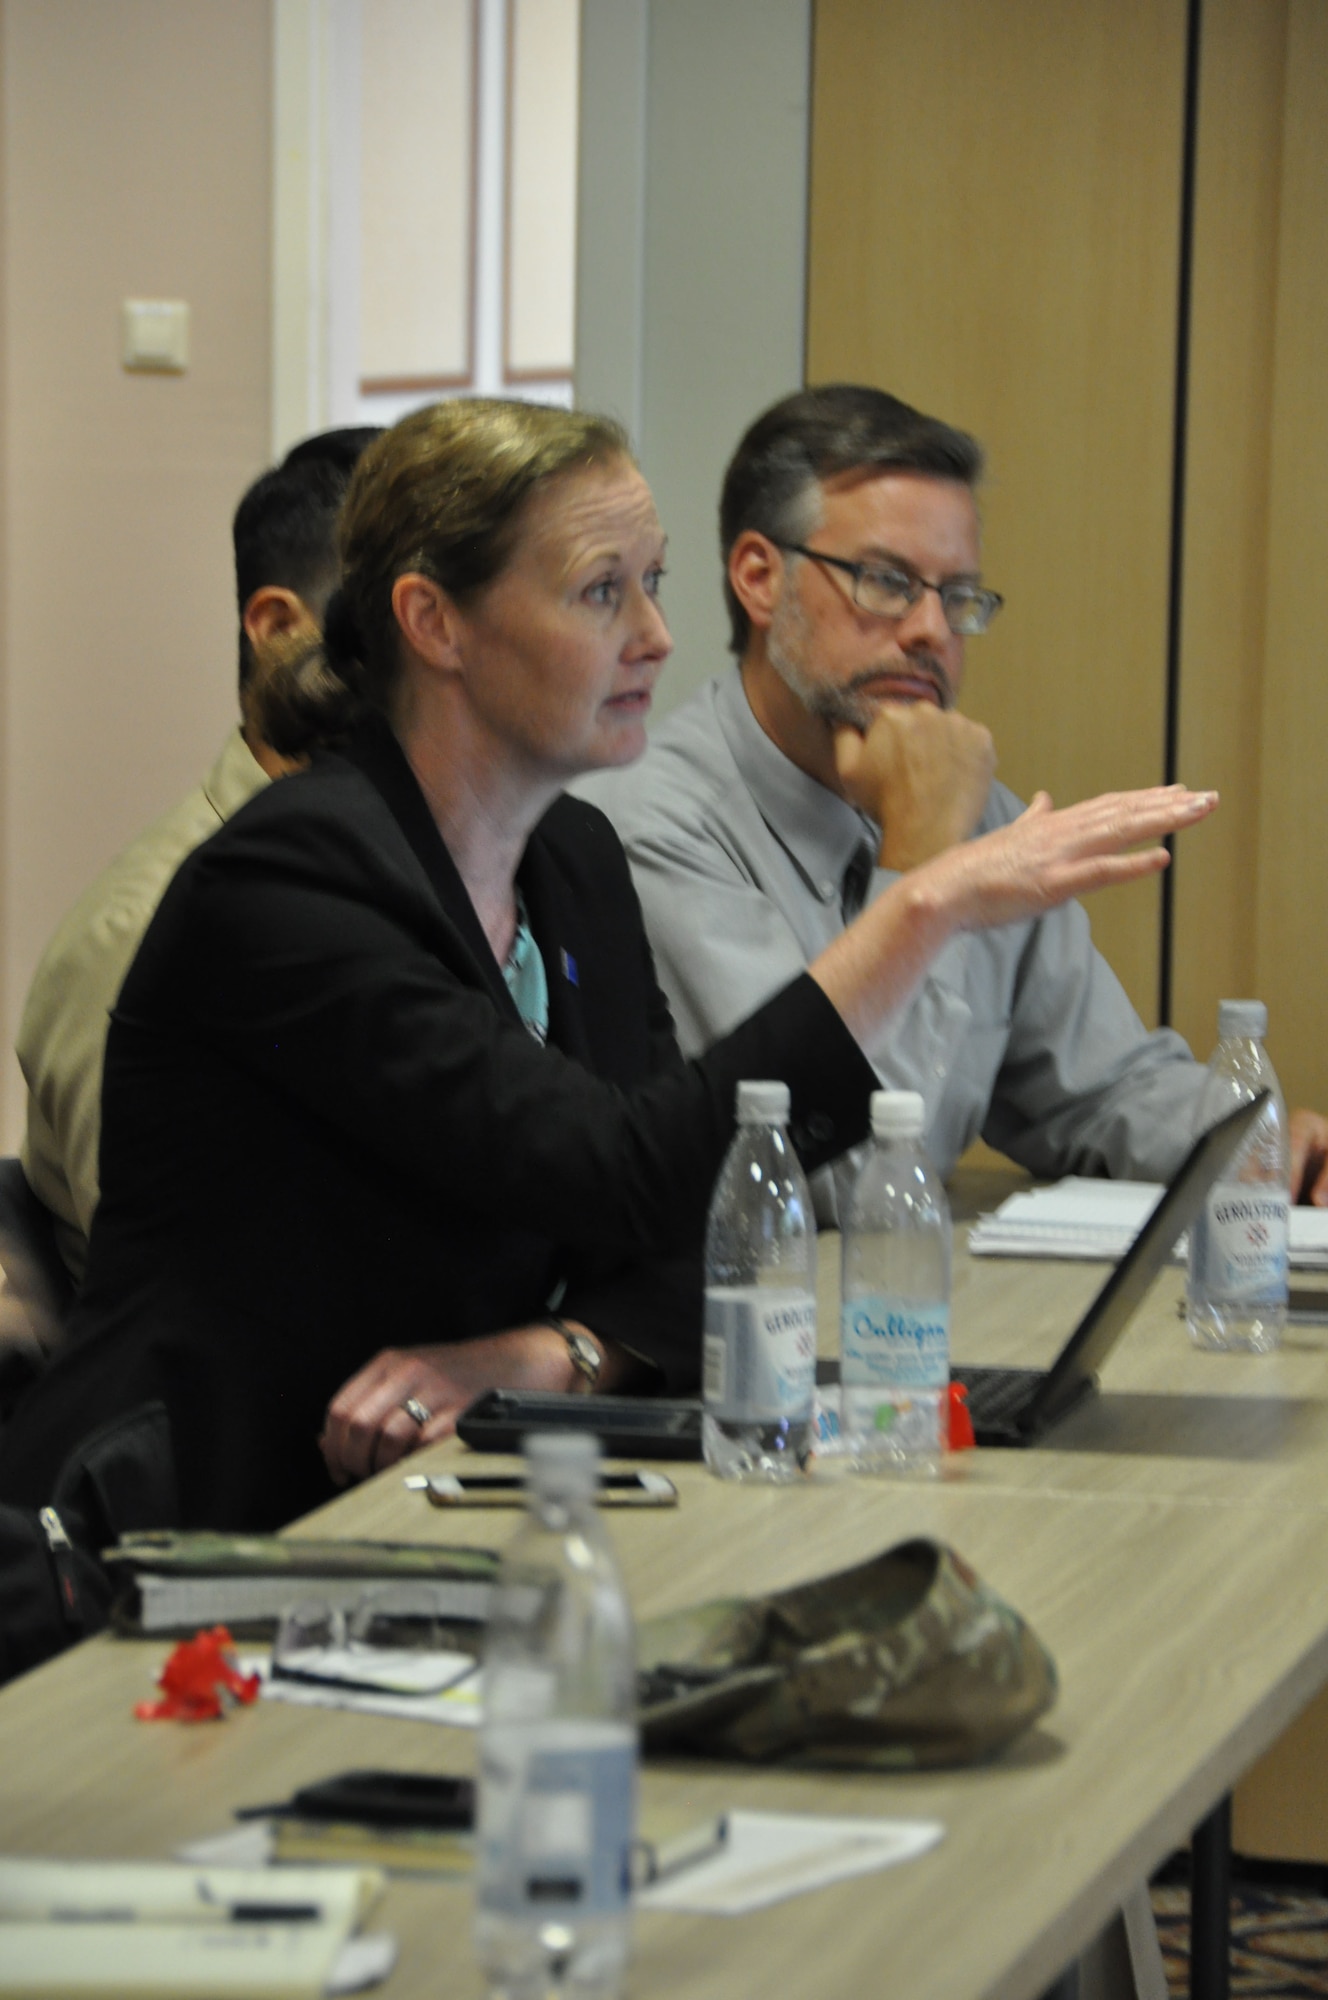 Maureen Bartee, associate director for Global Health Security, Center for Global Health, Centers for Disease Control and Prevention, shares information during a group discussion at the Infectious Disease Strategic Planning Workshop on Patch Barracks in Stuttgart, Germany, Sept. 6, 2019. The CDC was one of several U.S. government organizations in attendance during the three day event where they discussed AFRICOM's intermediate objective for the AFRICOM Theater Campaign Plan. With suggestions from the interagencies, Bartree said they then walked through how AFRICOM can achieve their goals. (U.S. Air Force photo by Master Sgt. Megan Crusher)